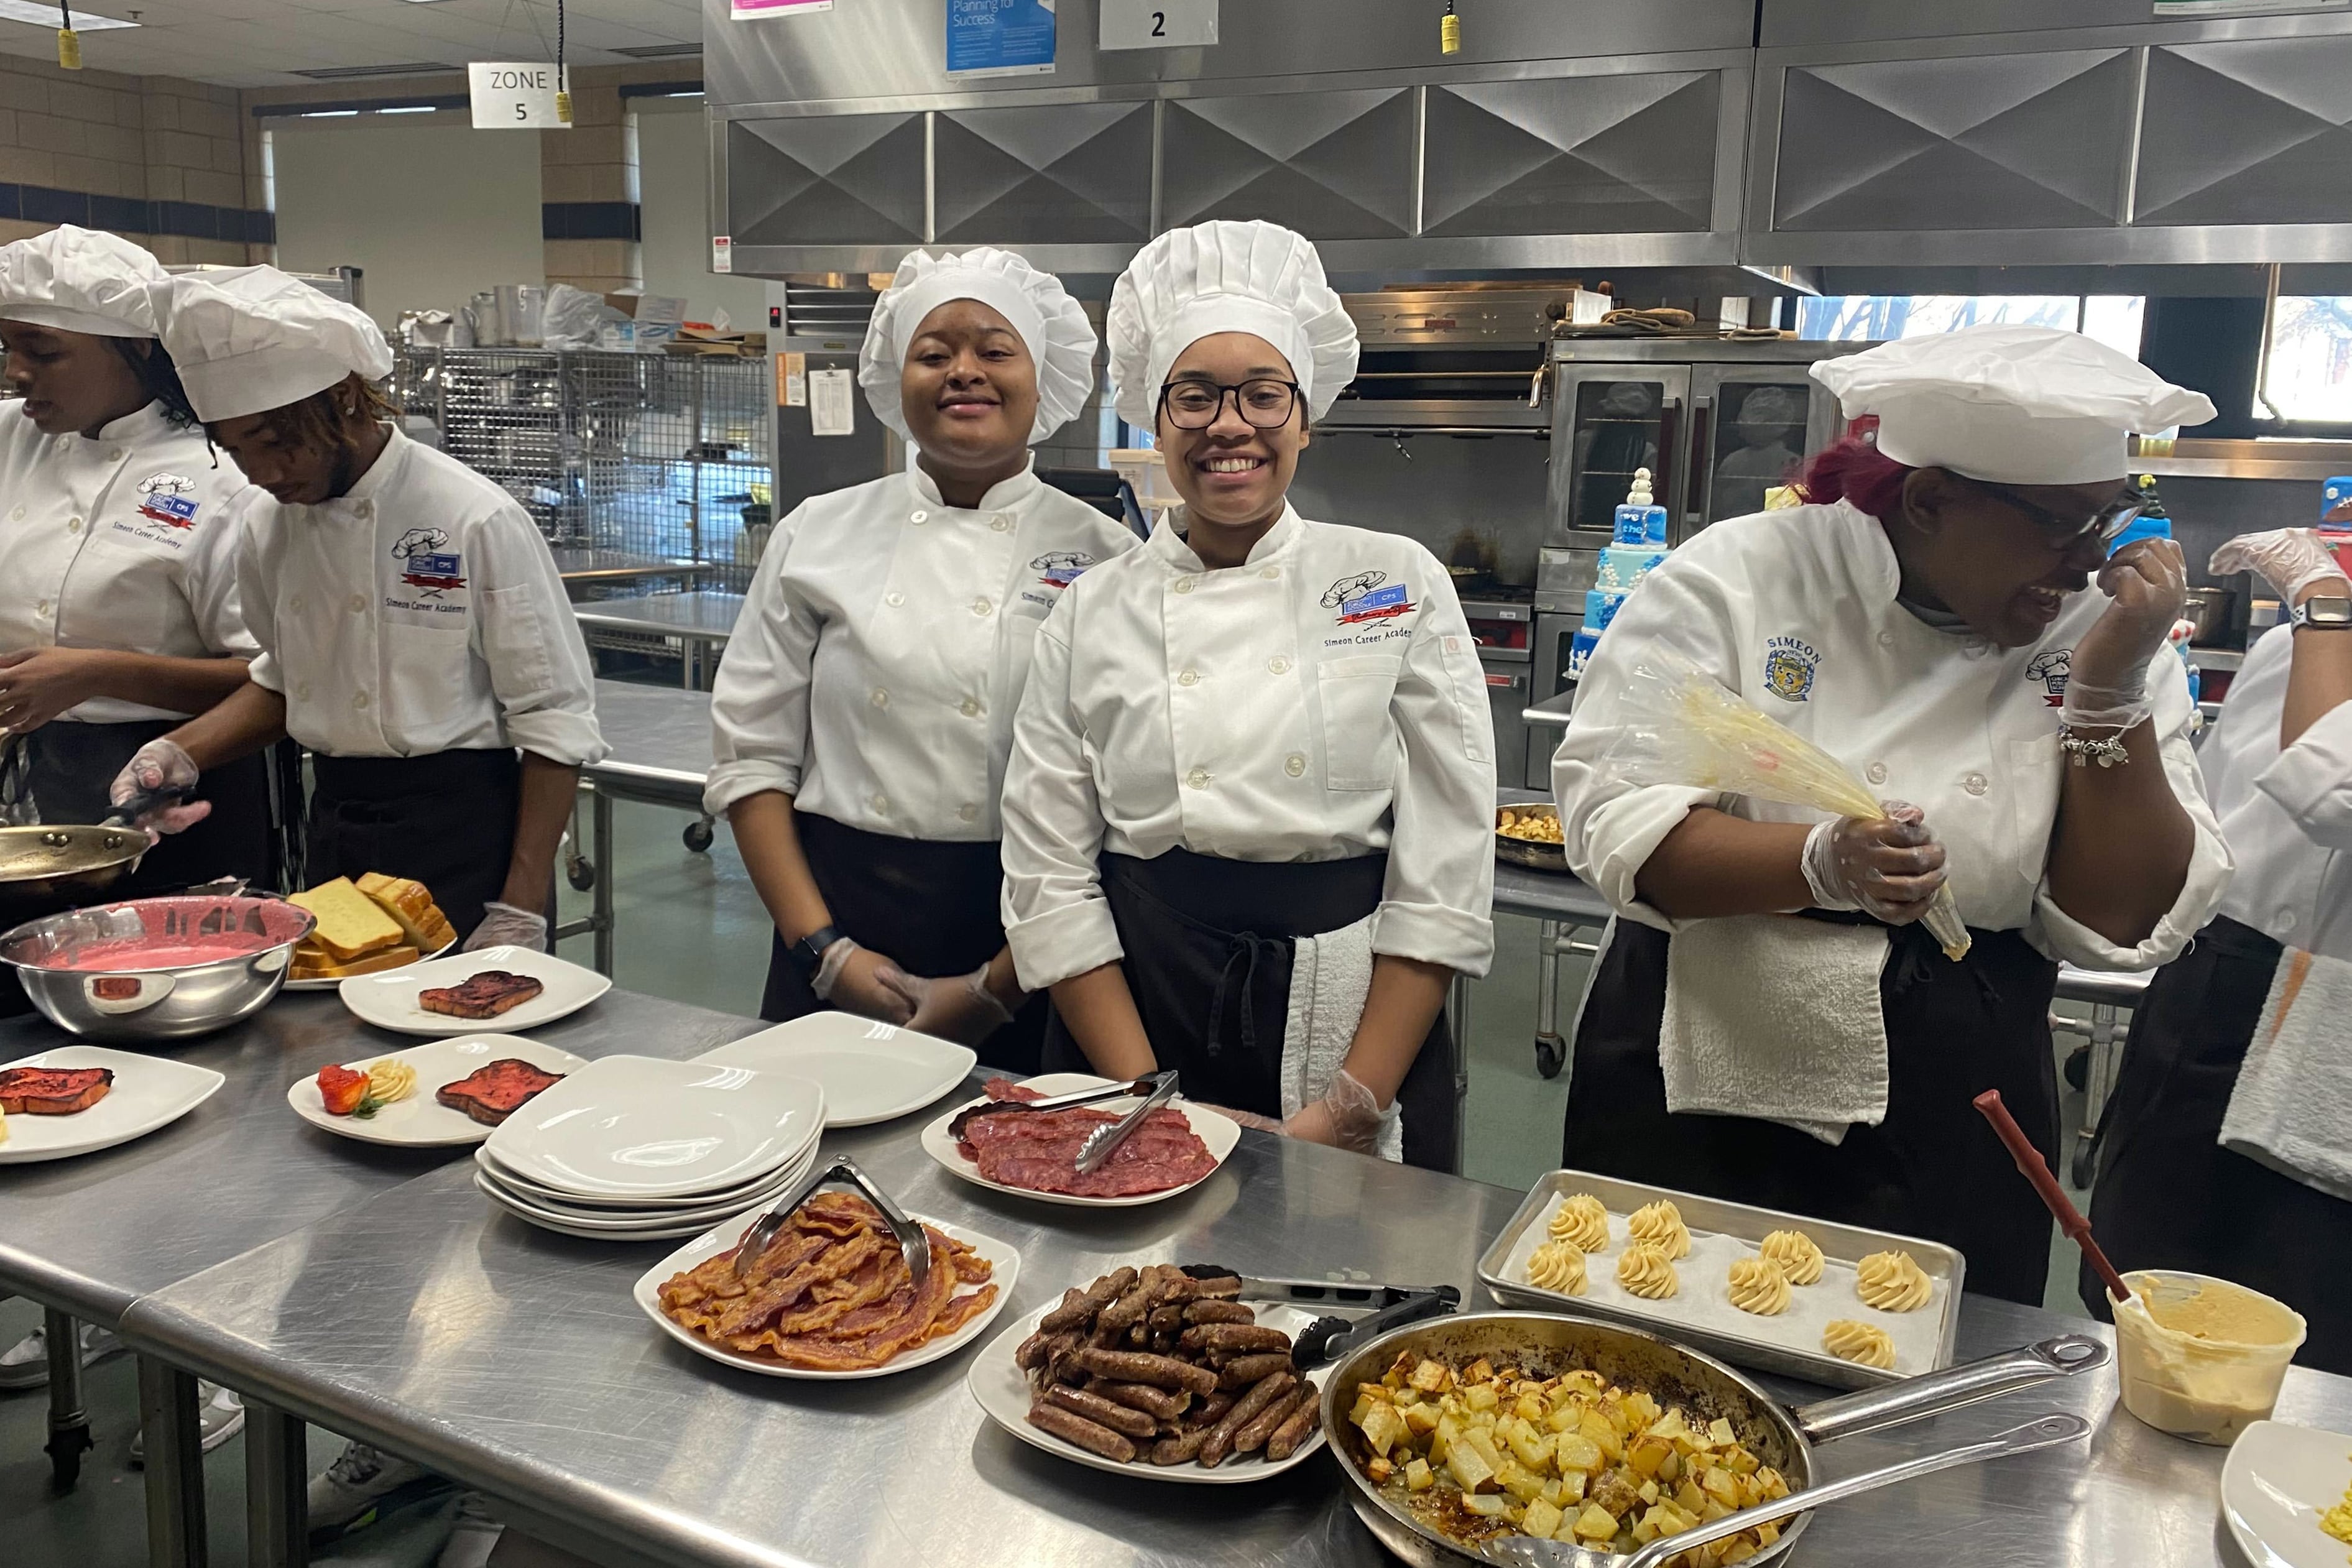 Six high school students wearing white chef coats and hats stand behind a metal table full of food.